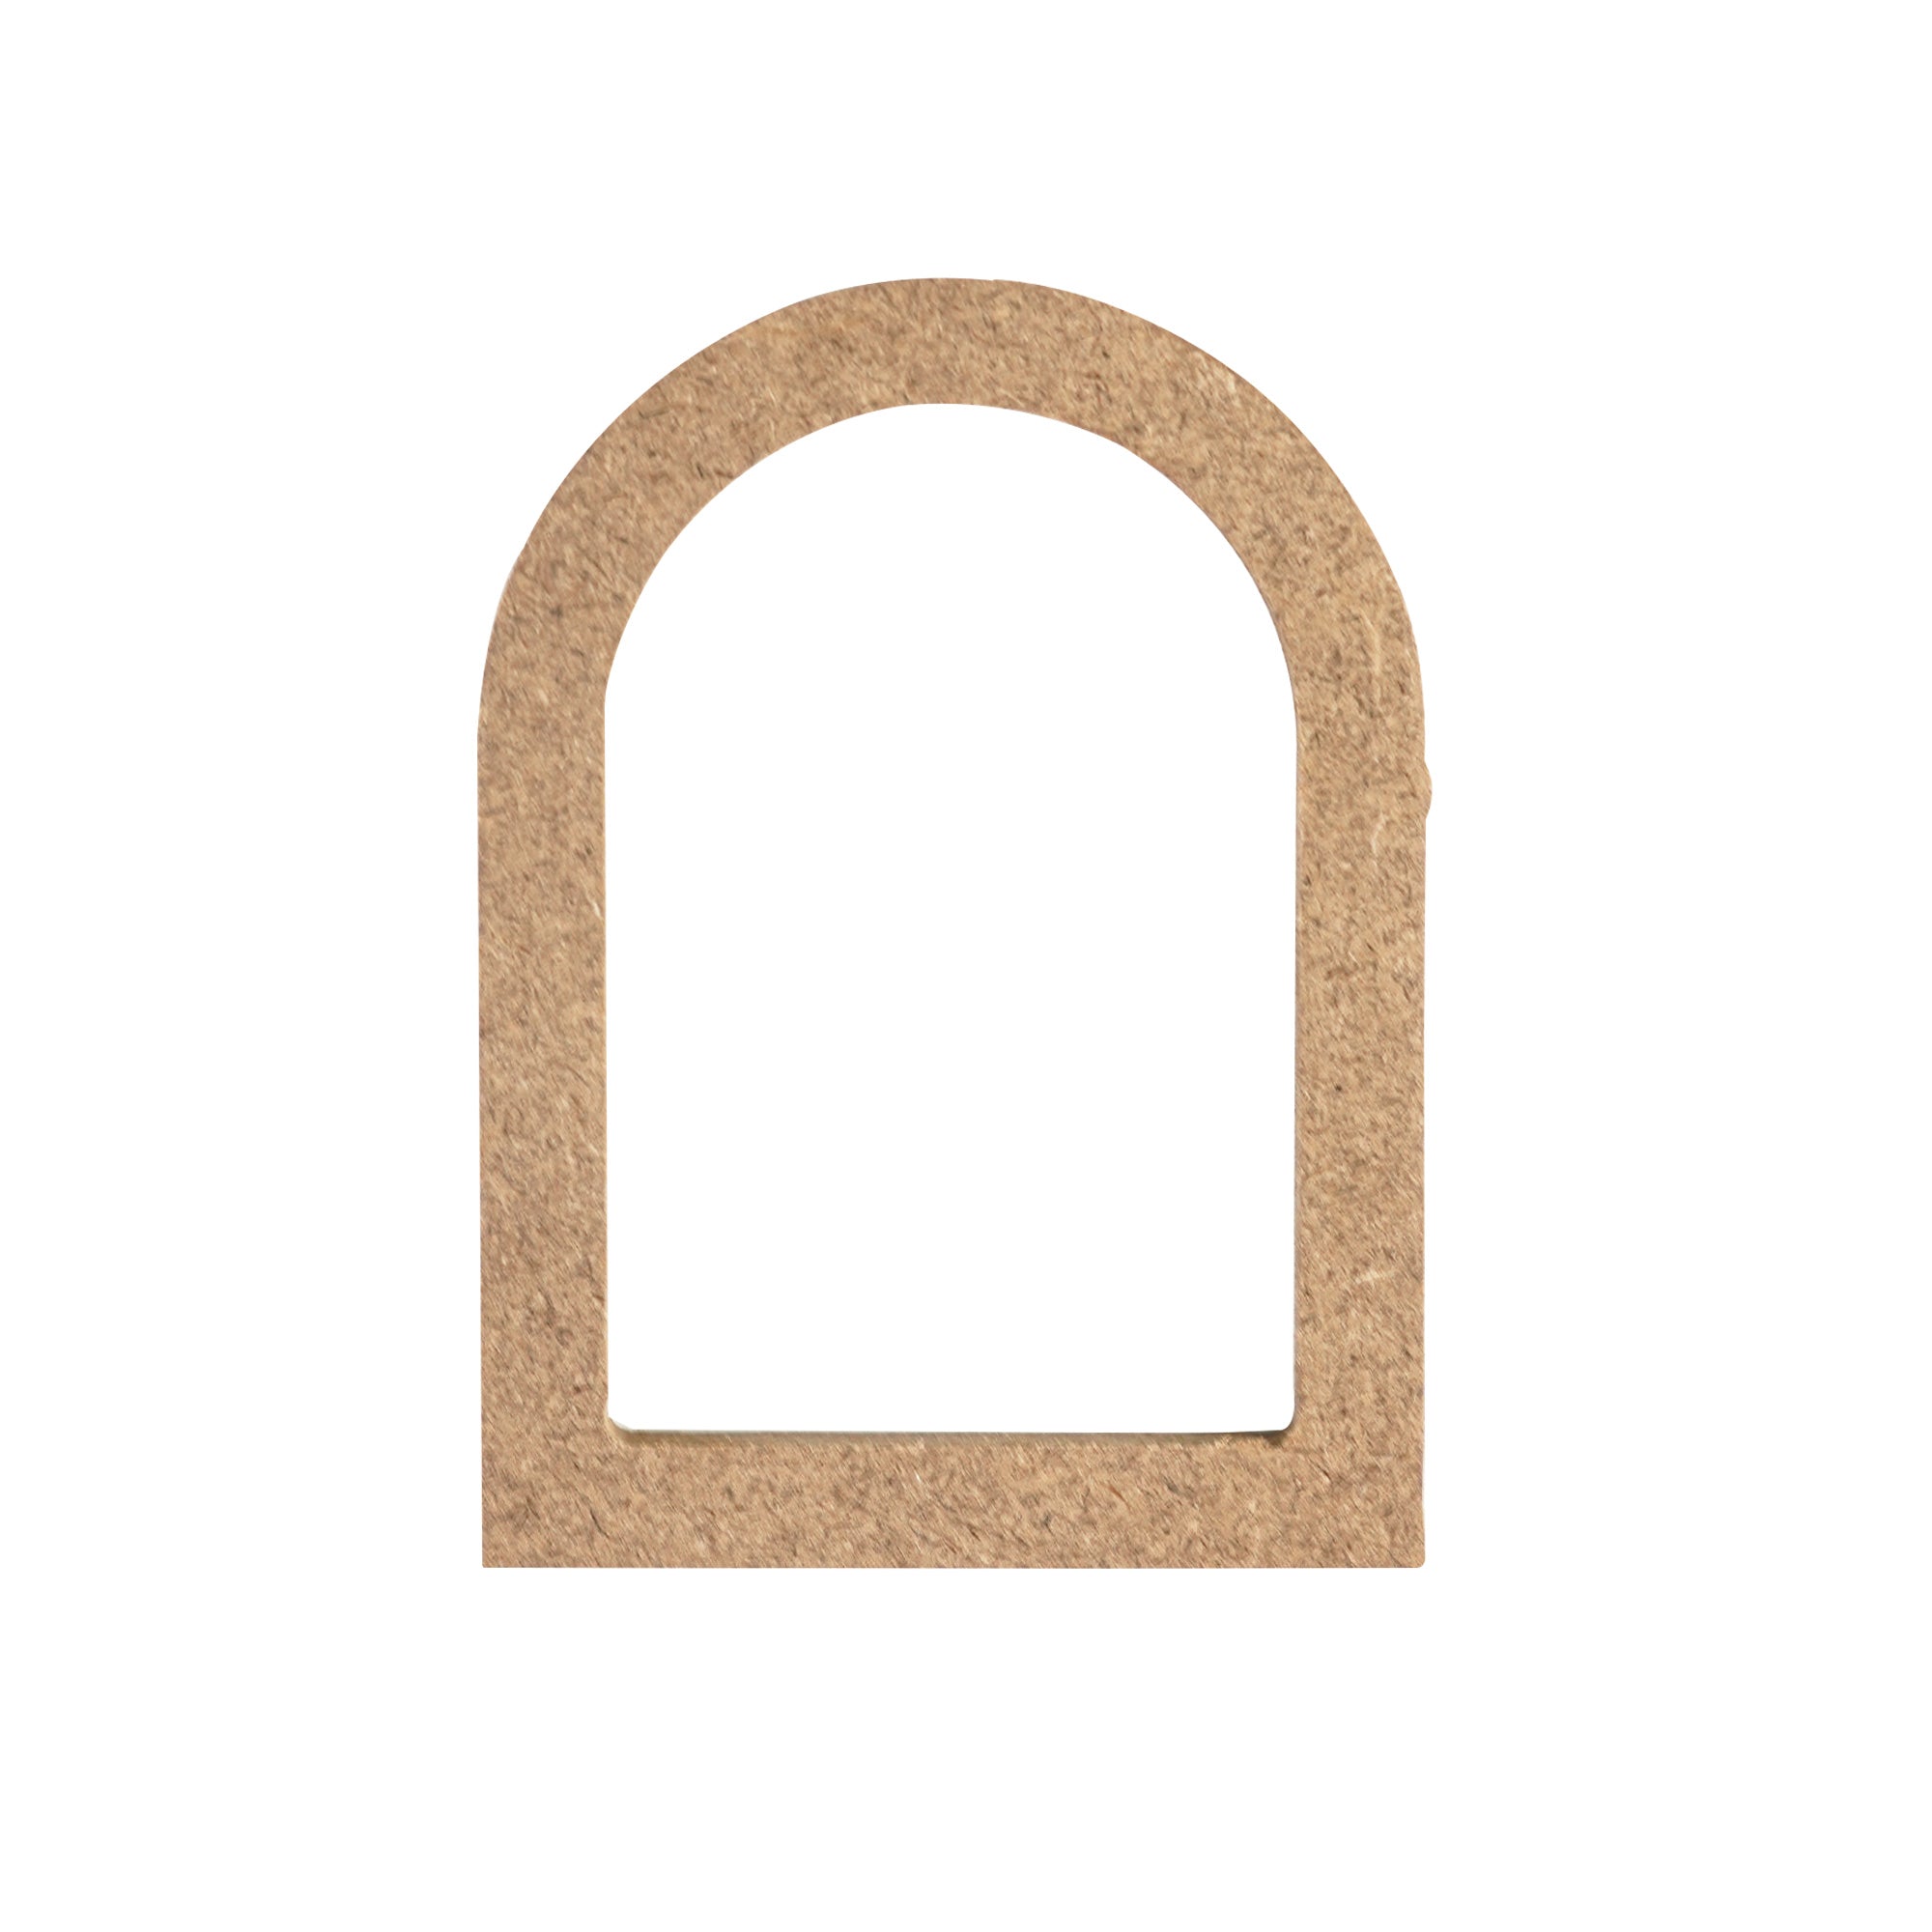 Build A Home Box Chajja For Arch Window W61.7 X H84.4 mm 1pc